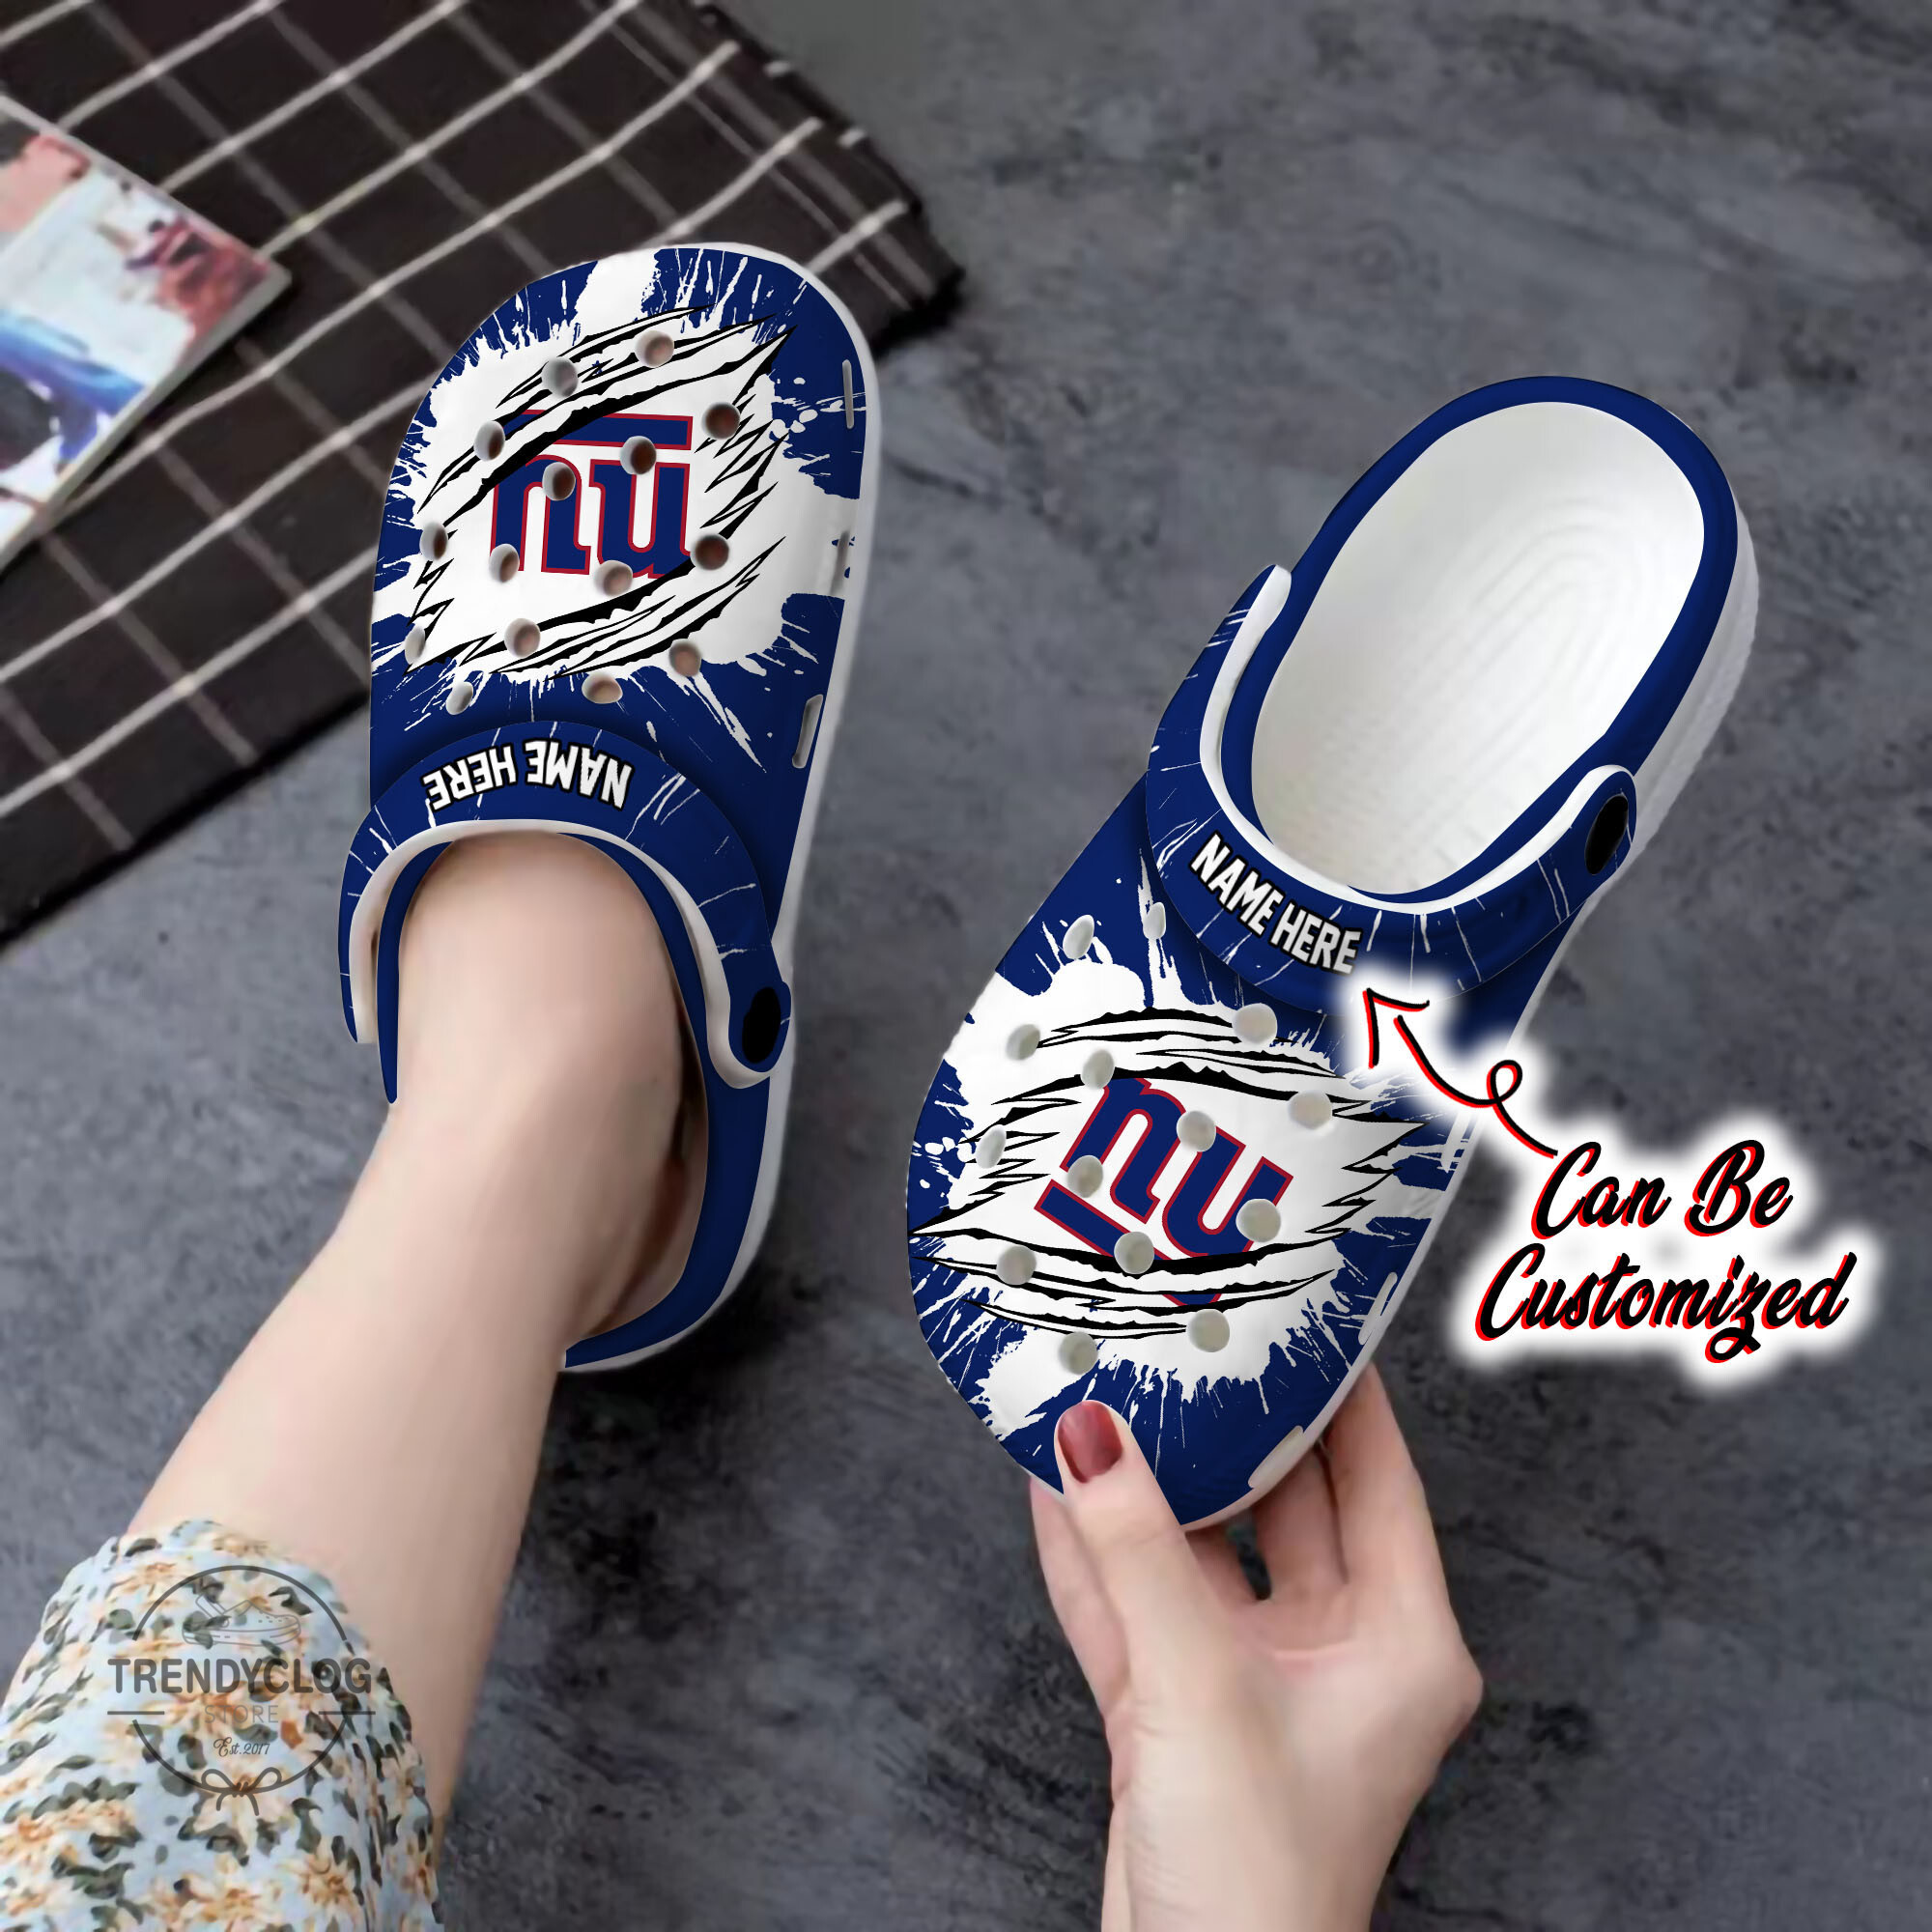 Giants Crocs Personalized NY Giants Football Ripped Claw Clog Shoes